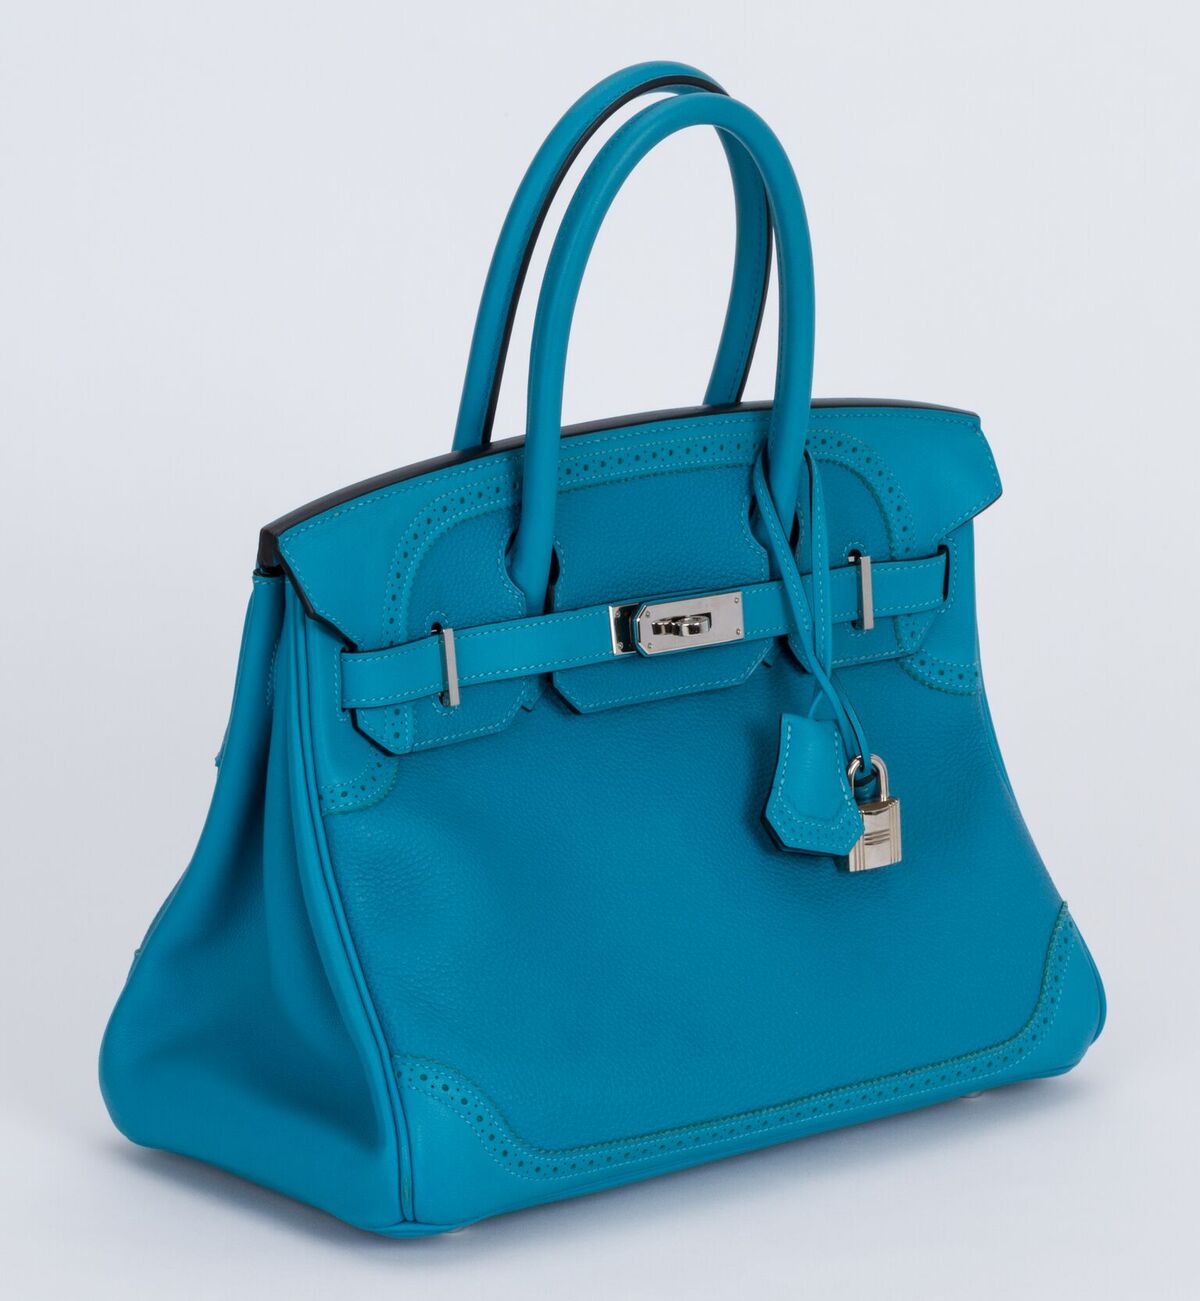 HERMES KELLY 35 Ghillies Togo leather/Swift leather Turquoise blue